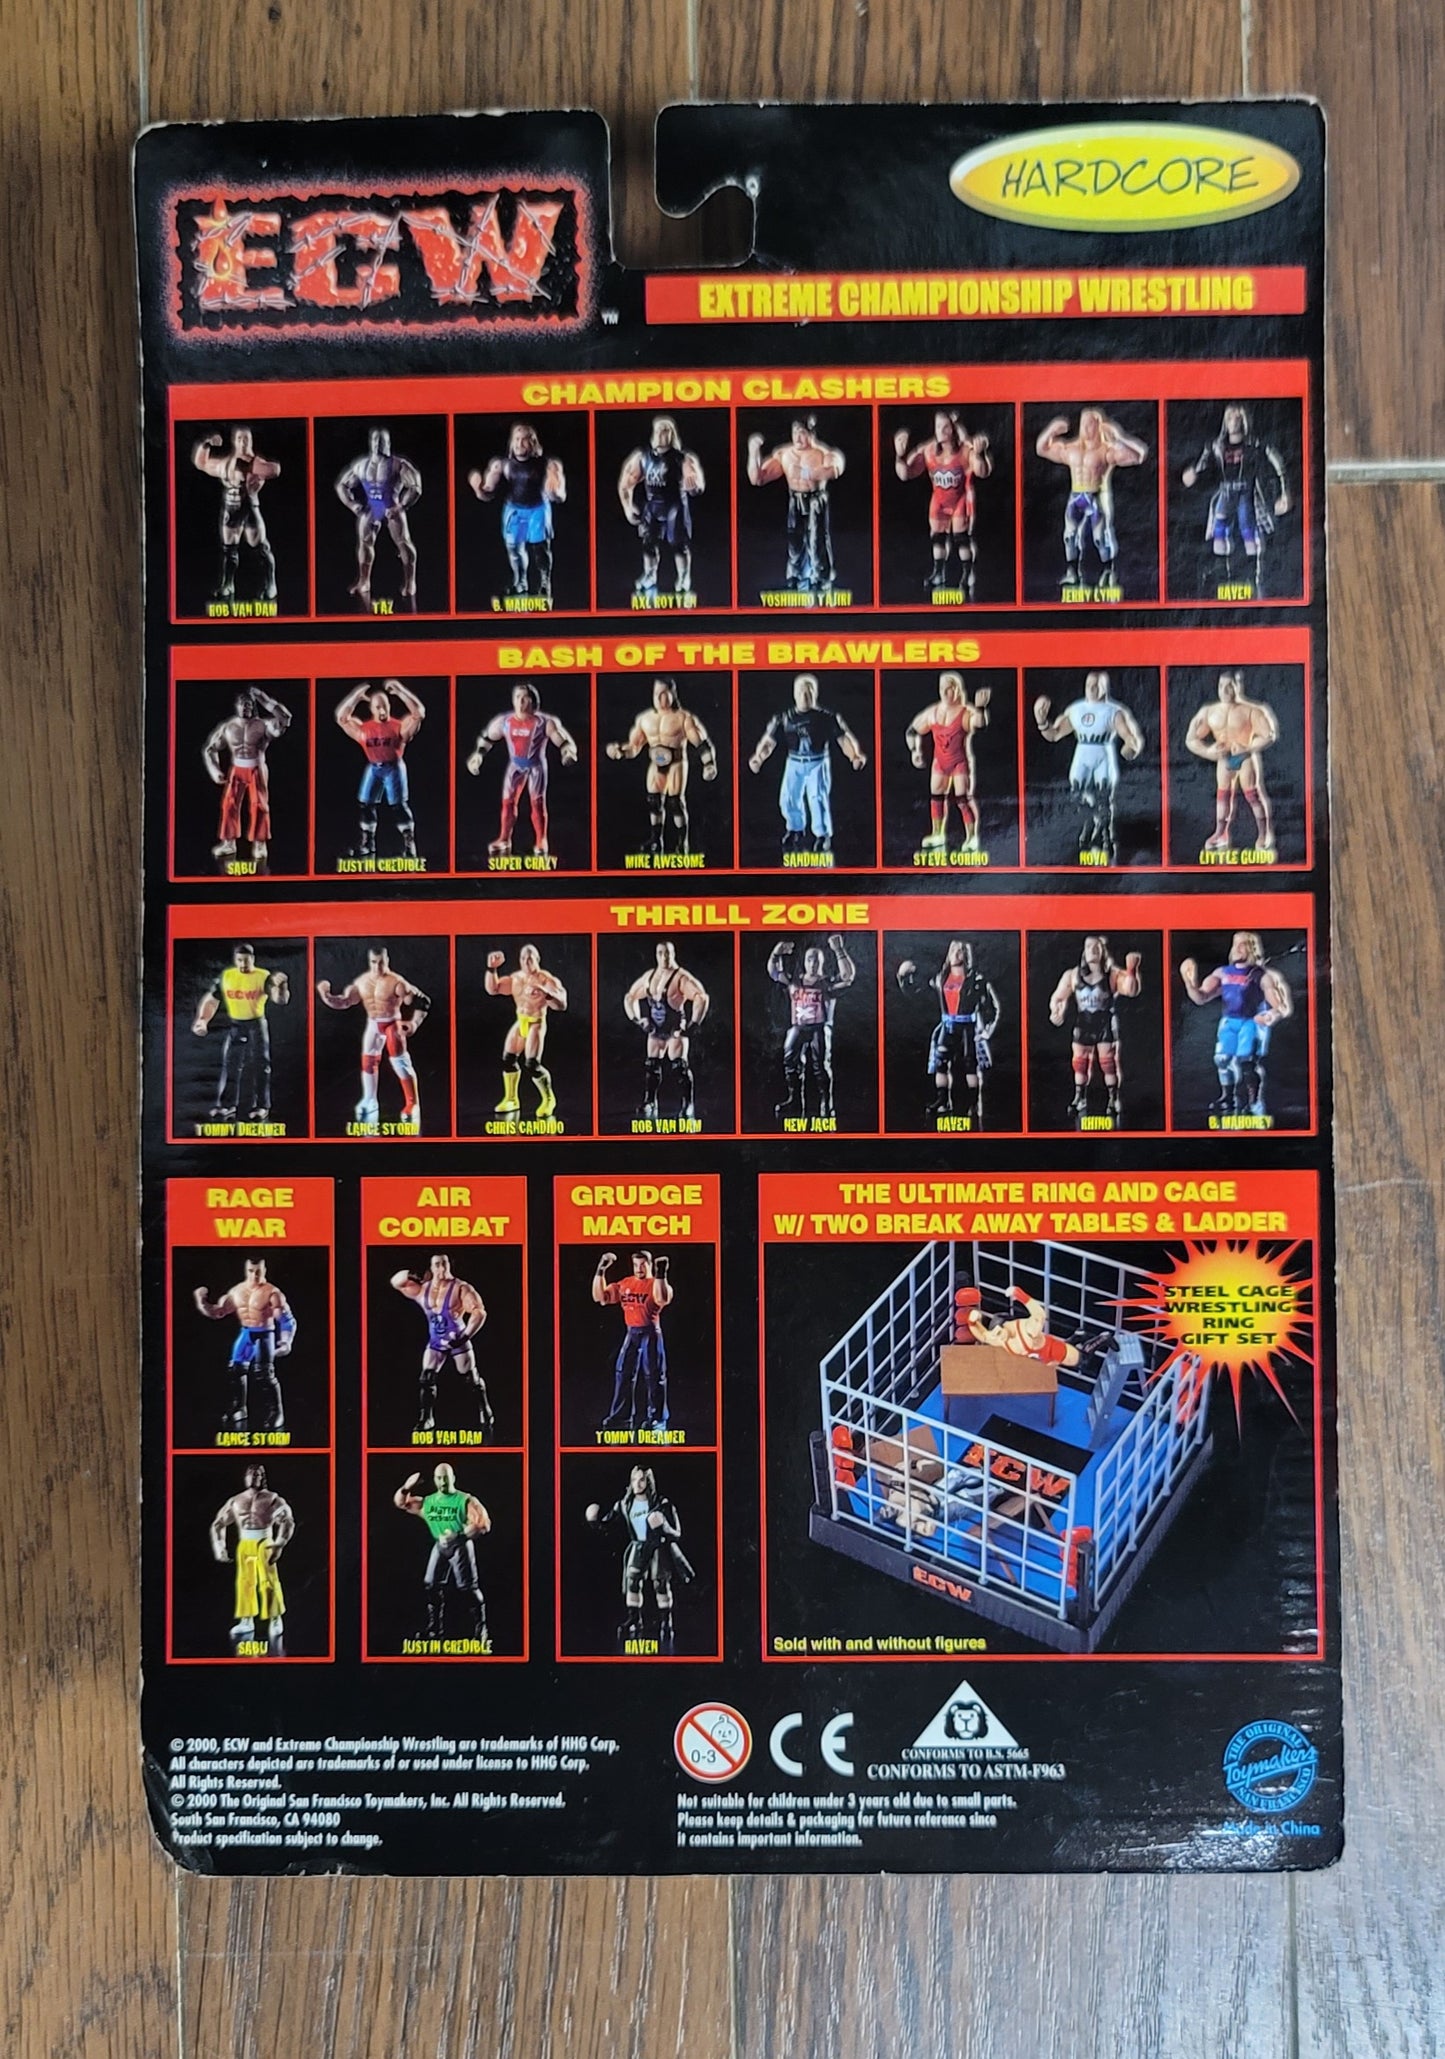 2000 Toy Makers ECW Mike Awesome Bash Brawlers Hardcore Wrestling Action Figure